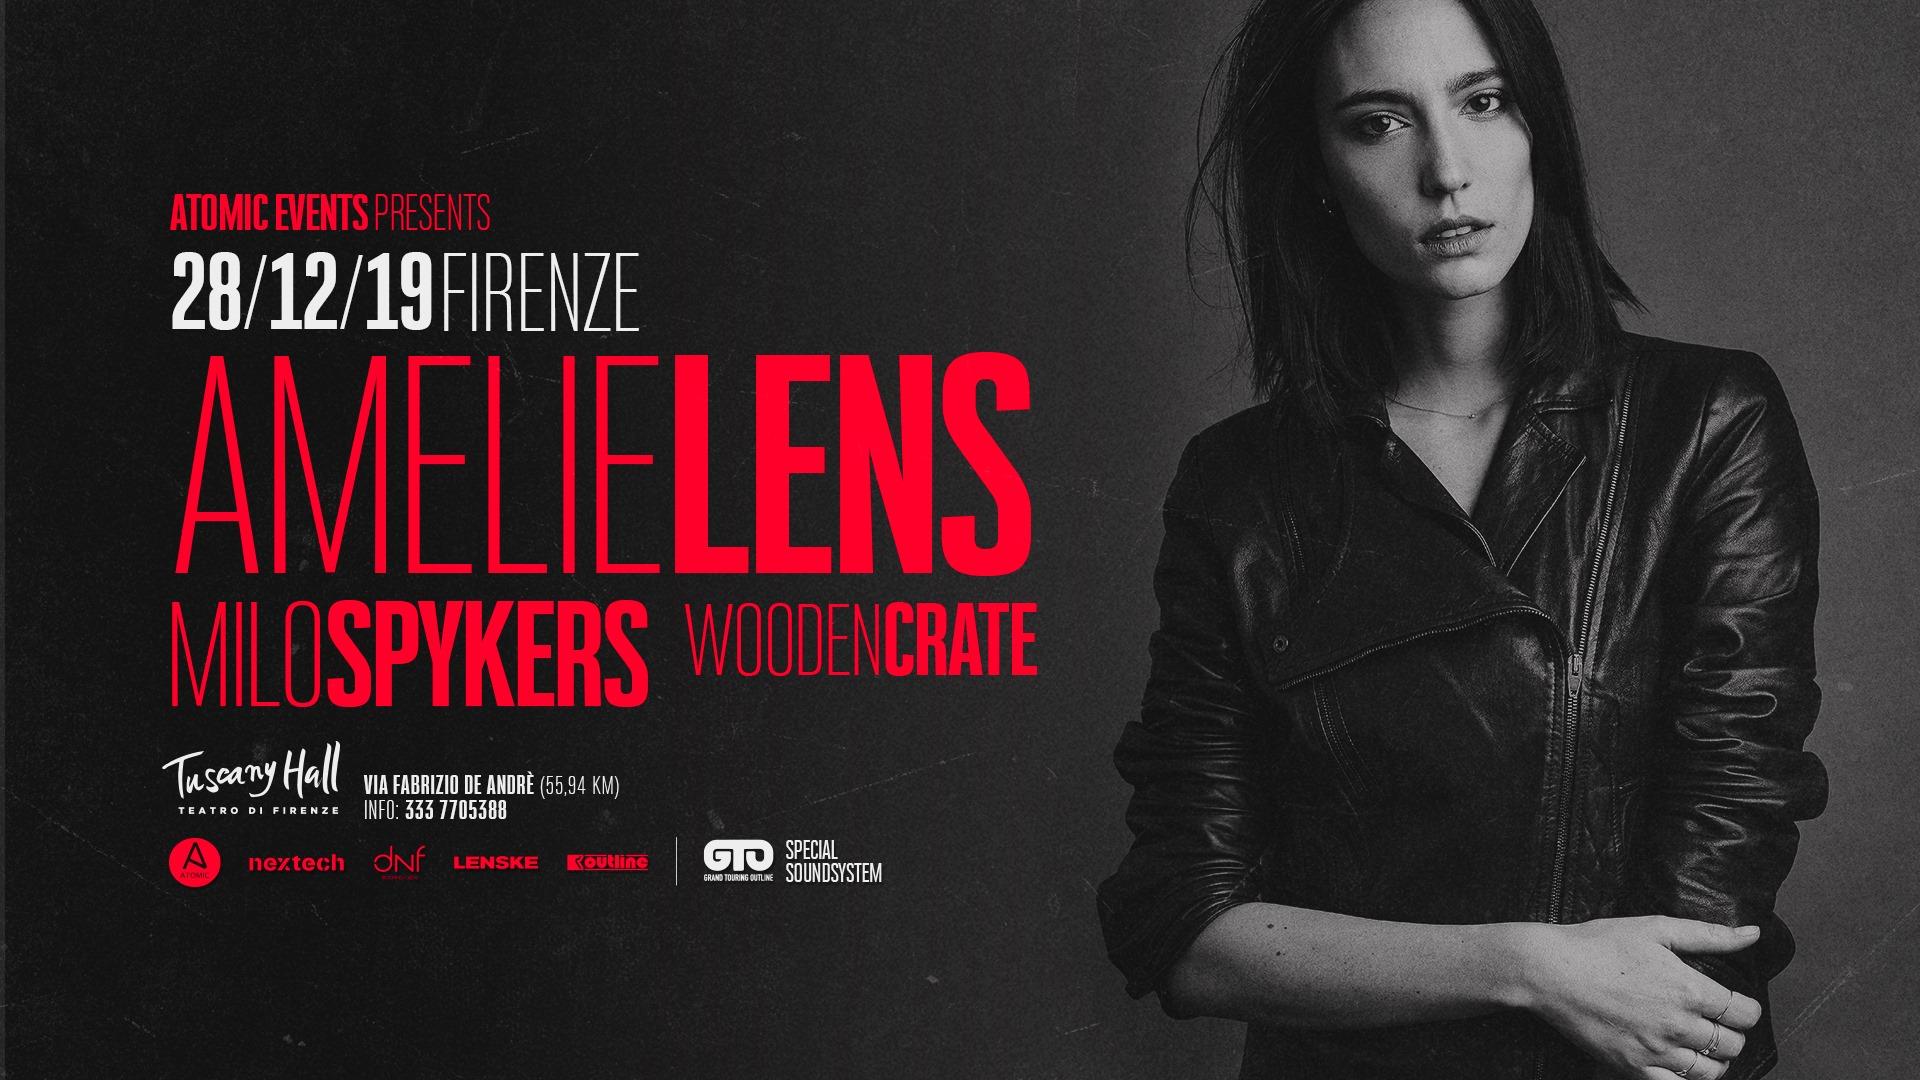 Amelie Lens. Milo Spykers at Tuscany Hall Firenze